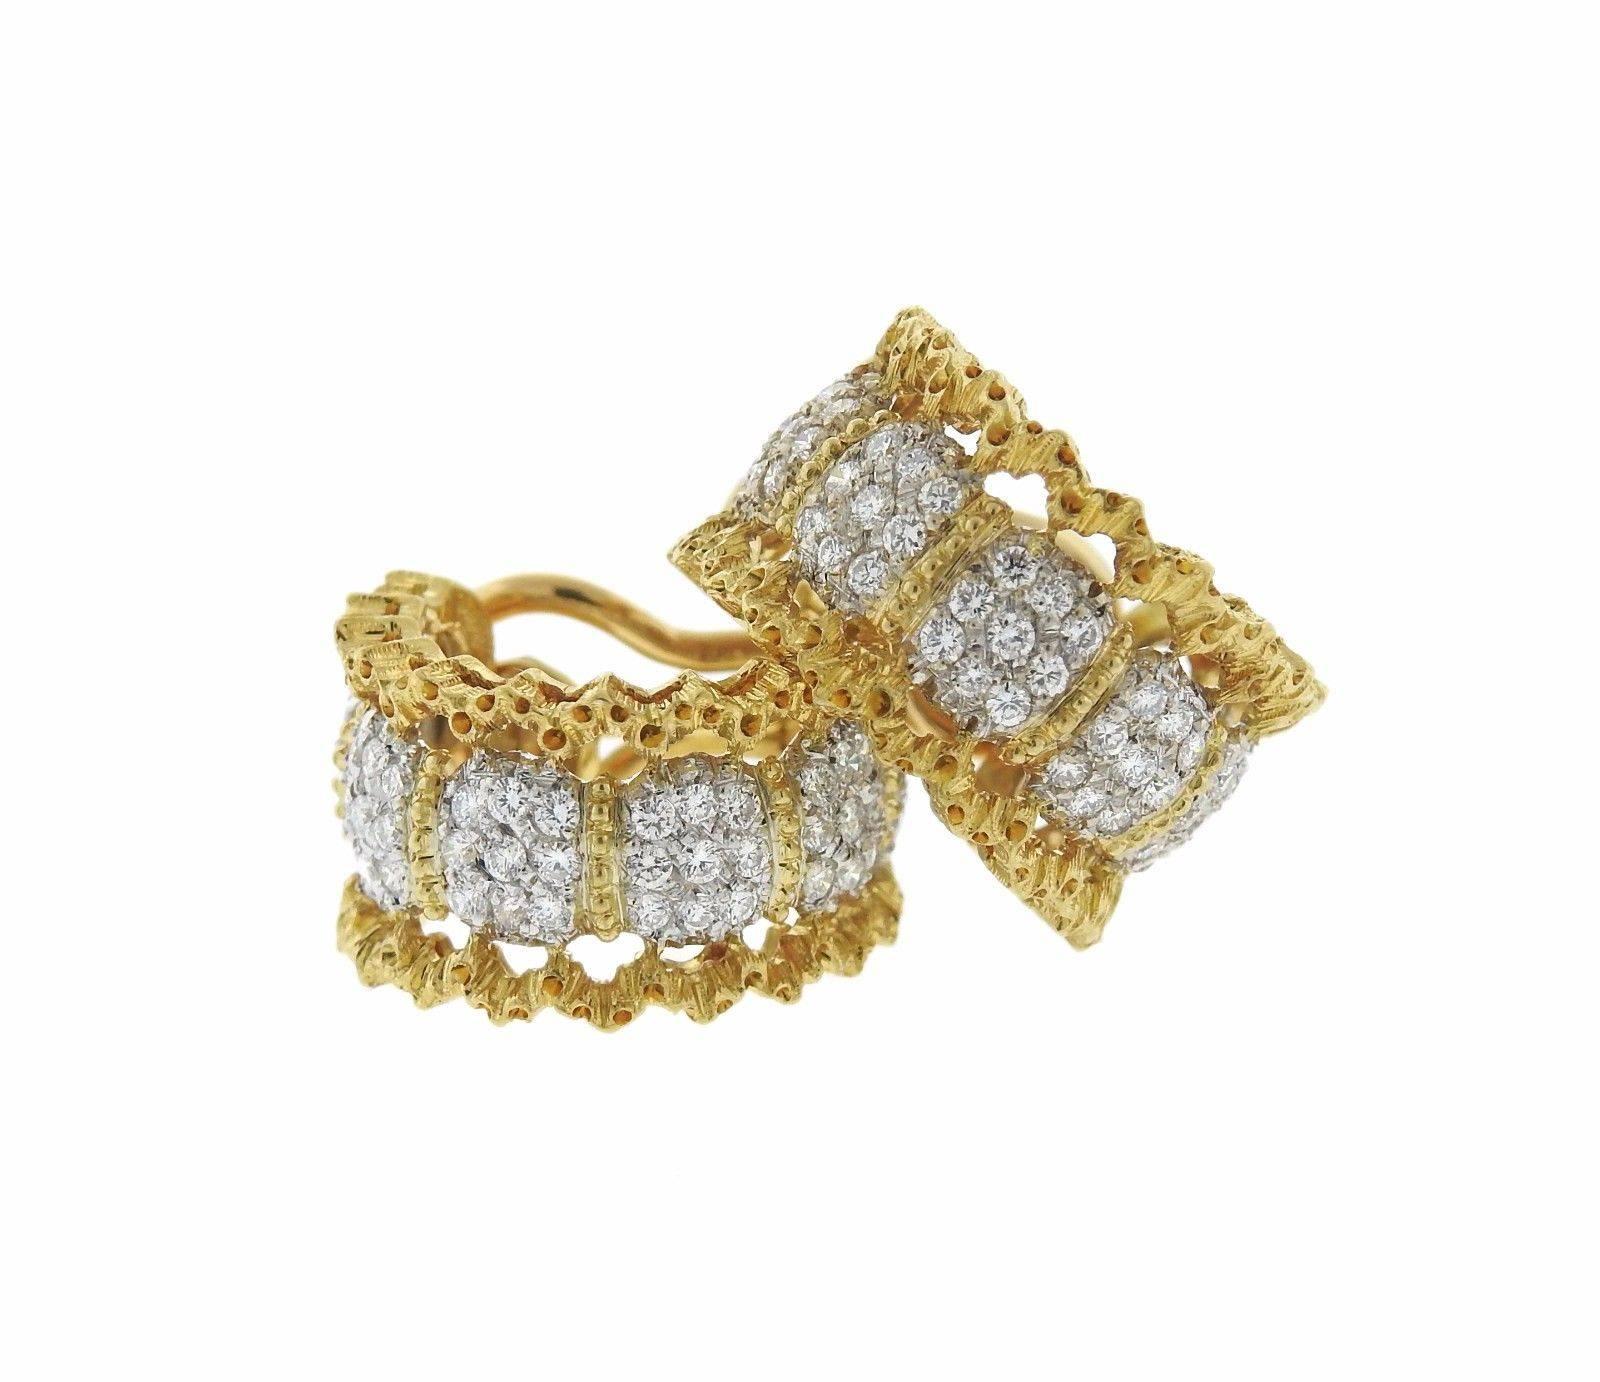 A pair of 18k gold earrings set with approximately 1.10ctw of G/VS diamonds.  The earrings measure 35mm x 13mm and weigh 12 grams.  Marked: Gianmaria Buccellati 18KT Italy.  The earrings retail for $21,030.